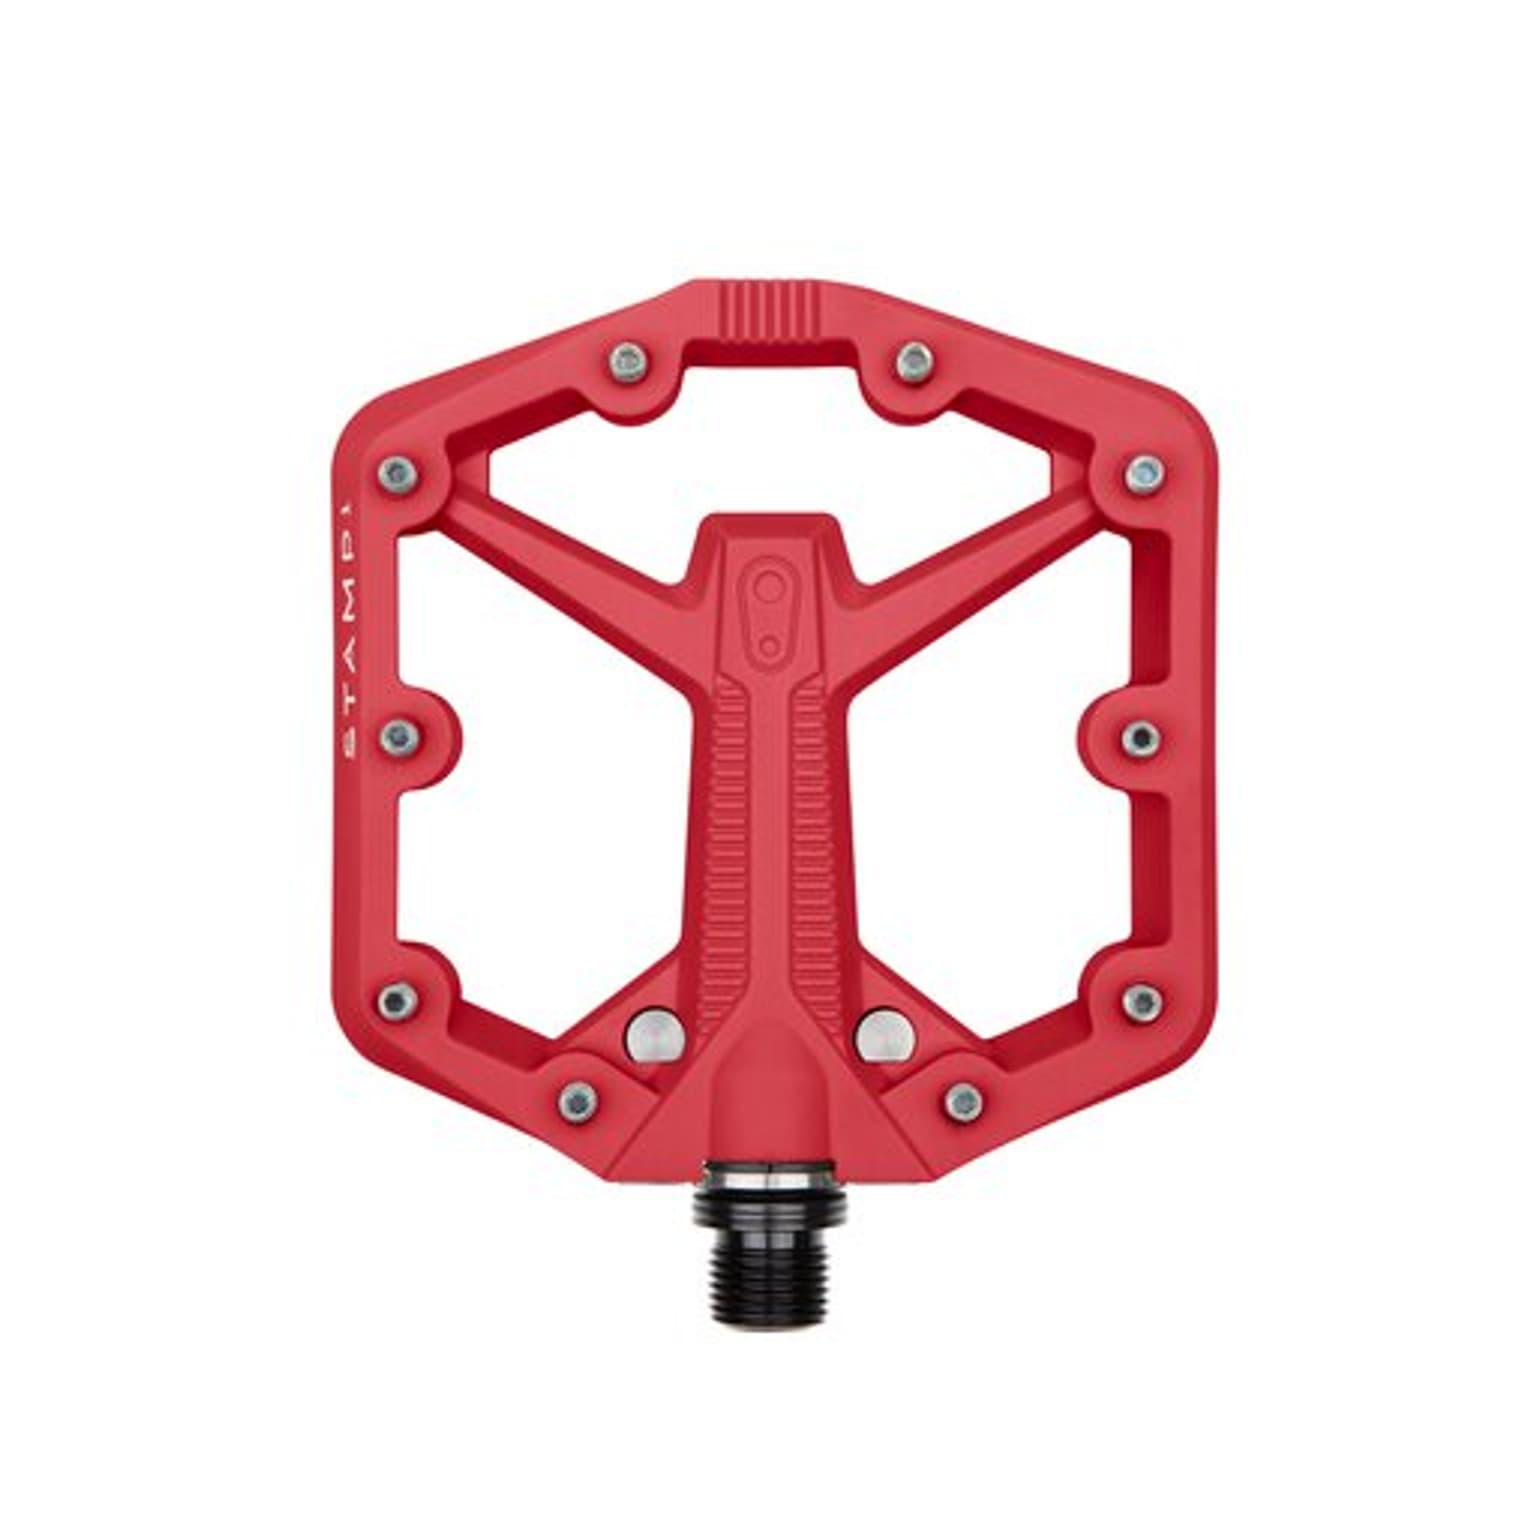 crankbrothers crankbrothers Pedal Stamp 1 small Pedali 1